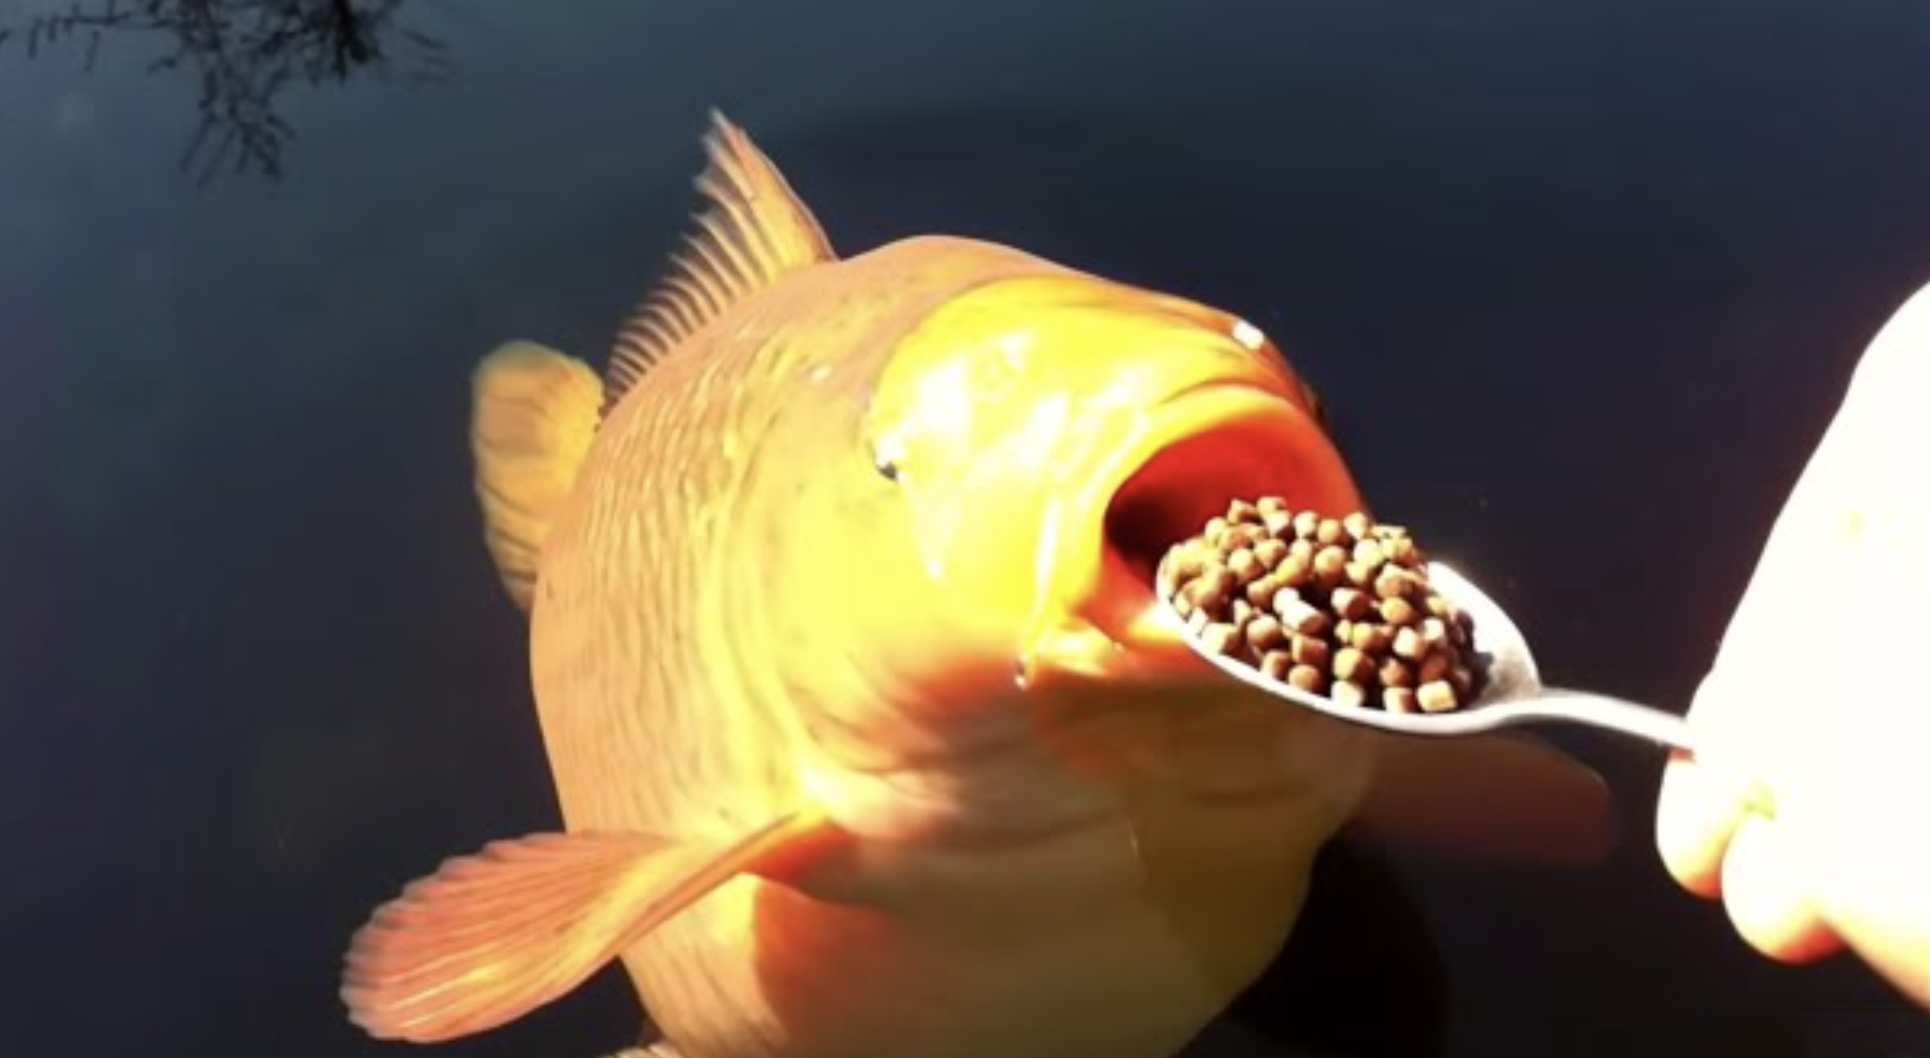 Koi Carp being fed pellets from a silver spoon